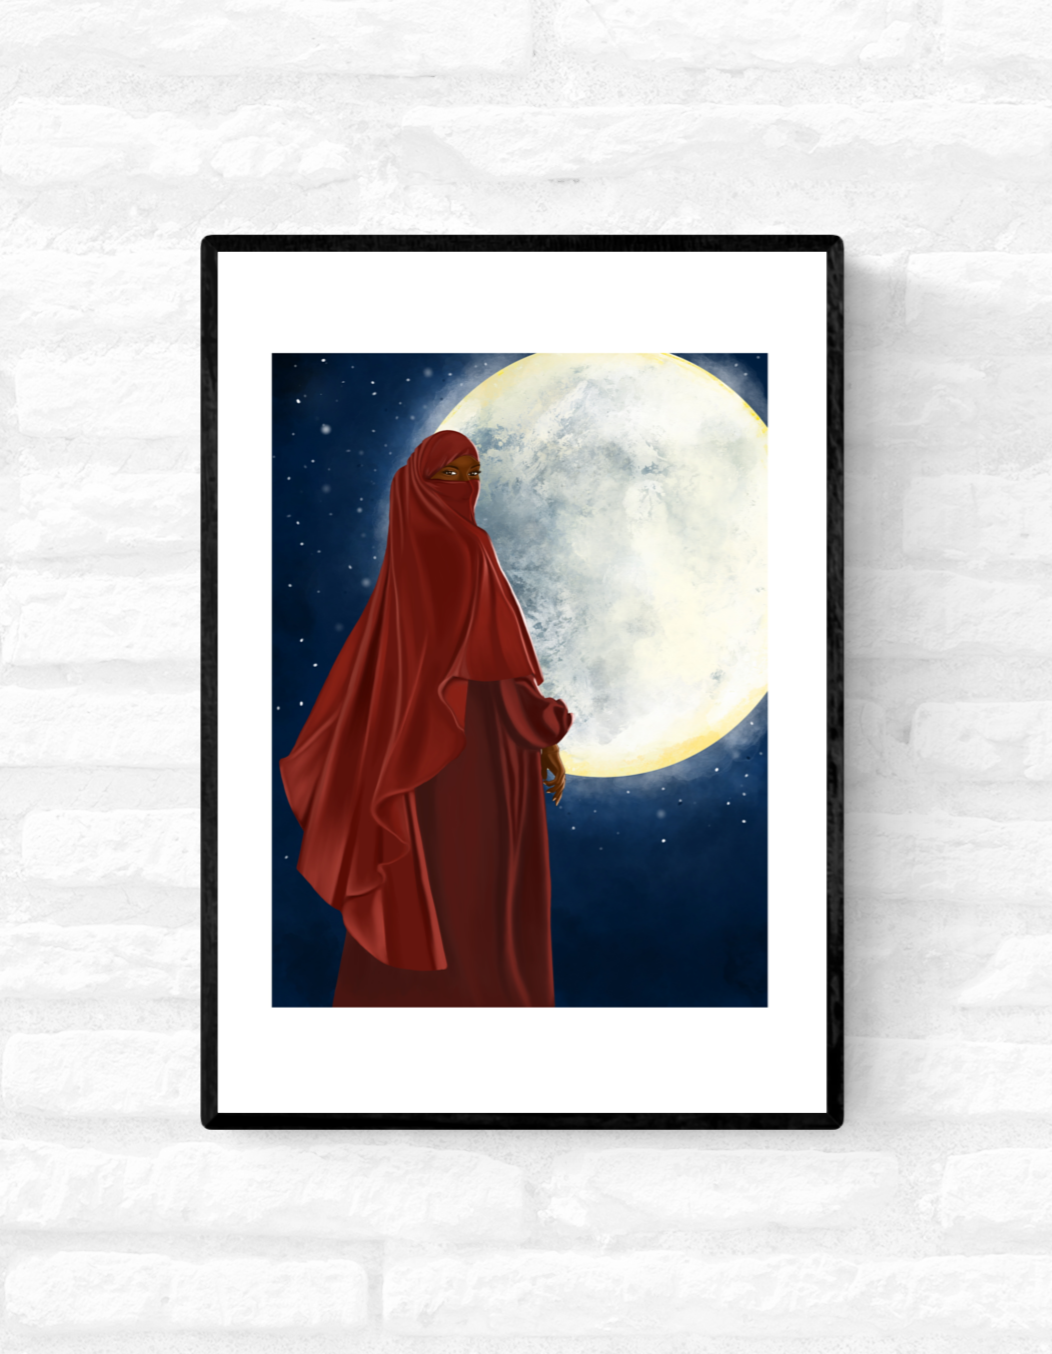 Framed wall art print of a black, Muslim woman wearing a red niqab, standing in front of the moon